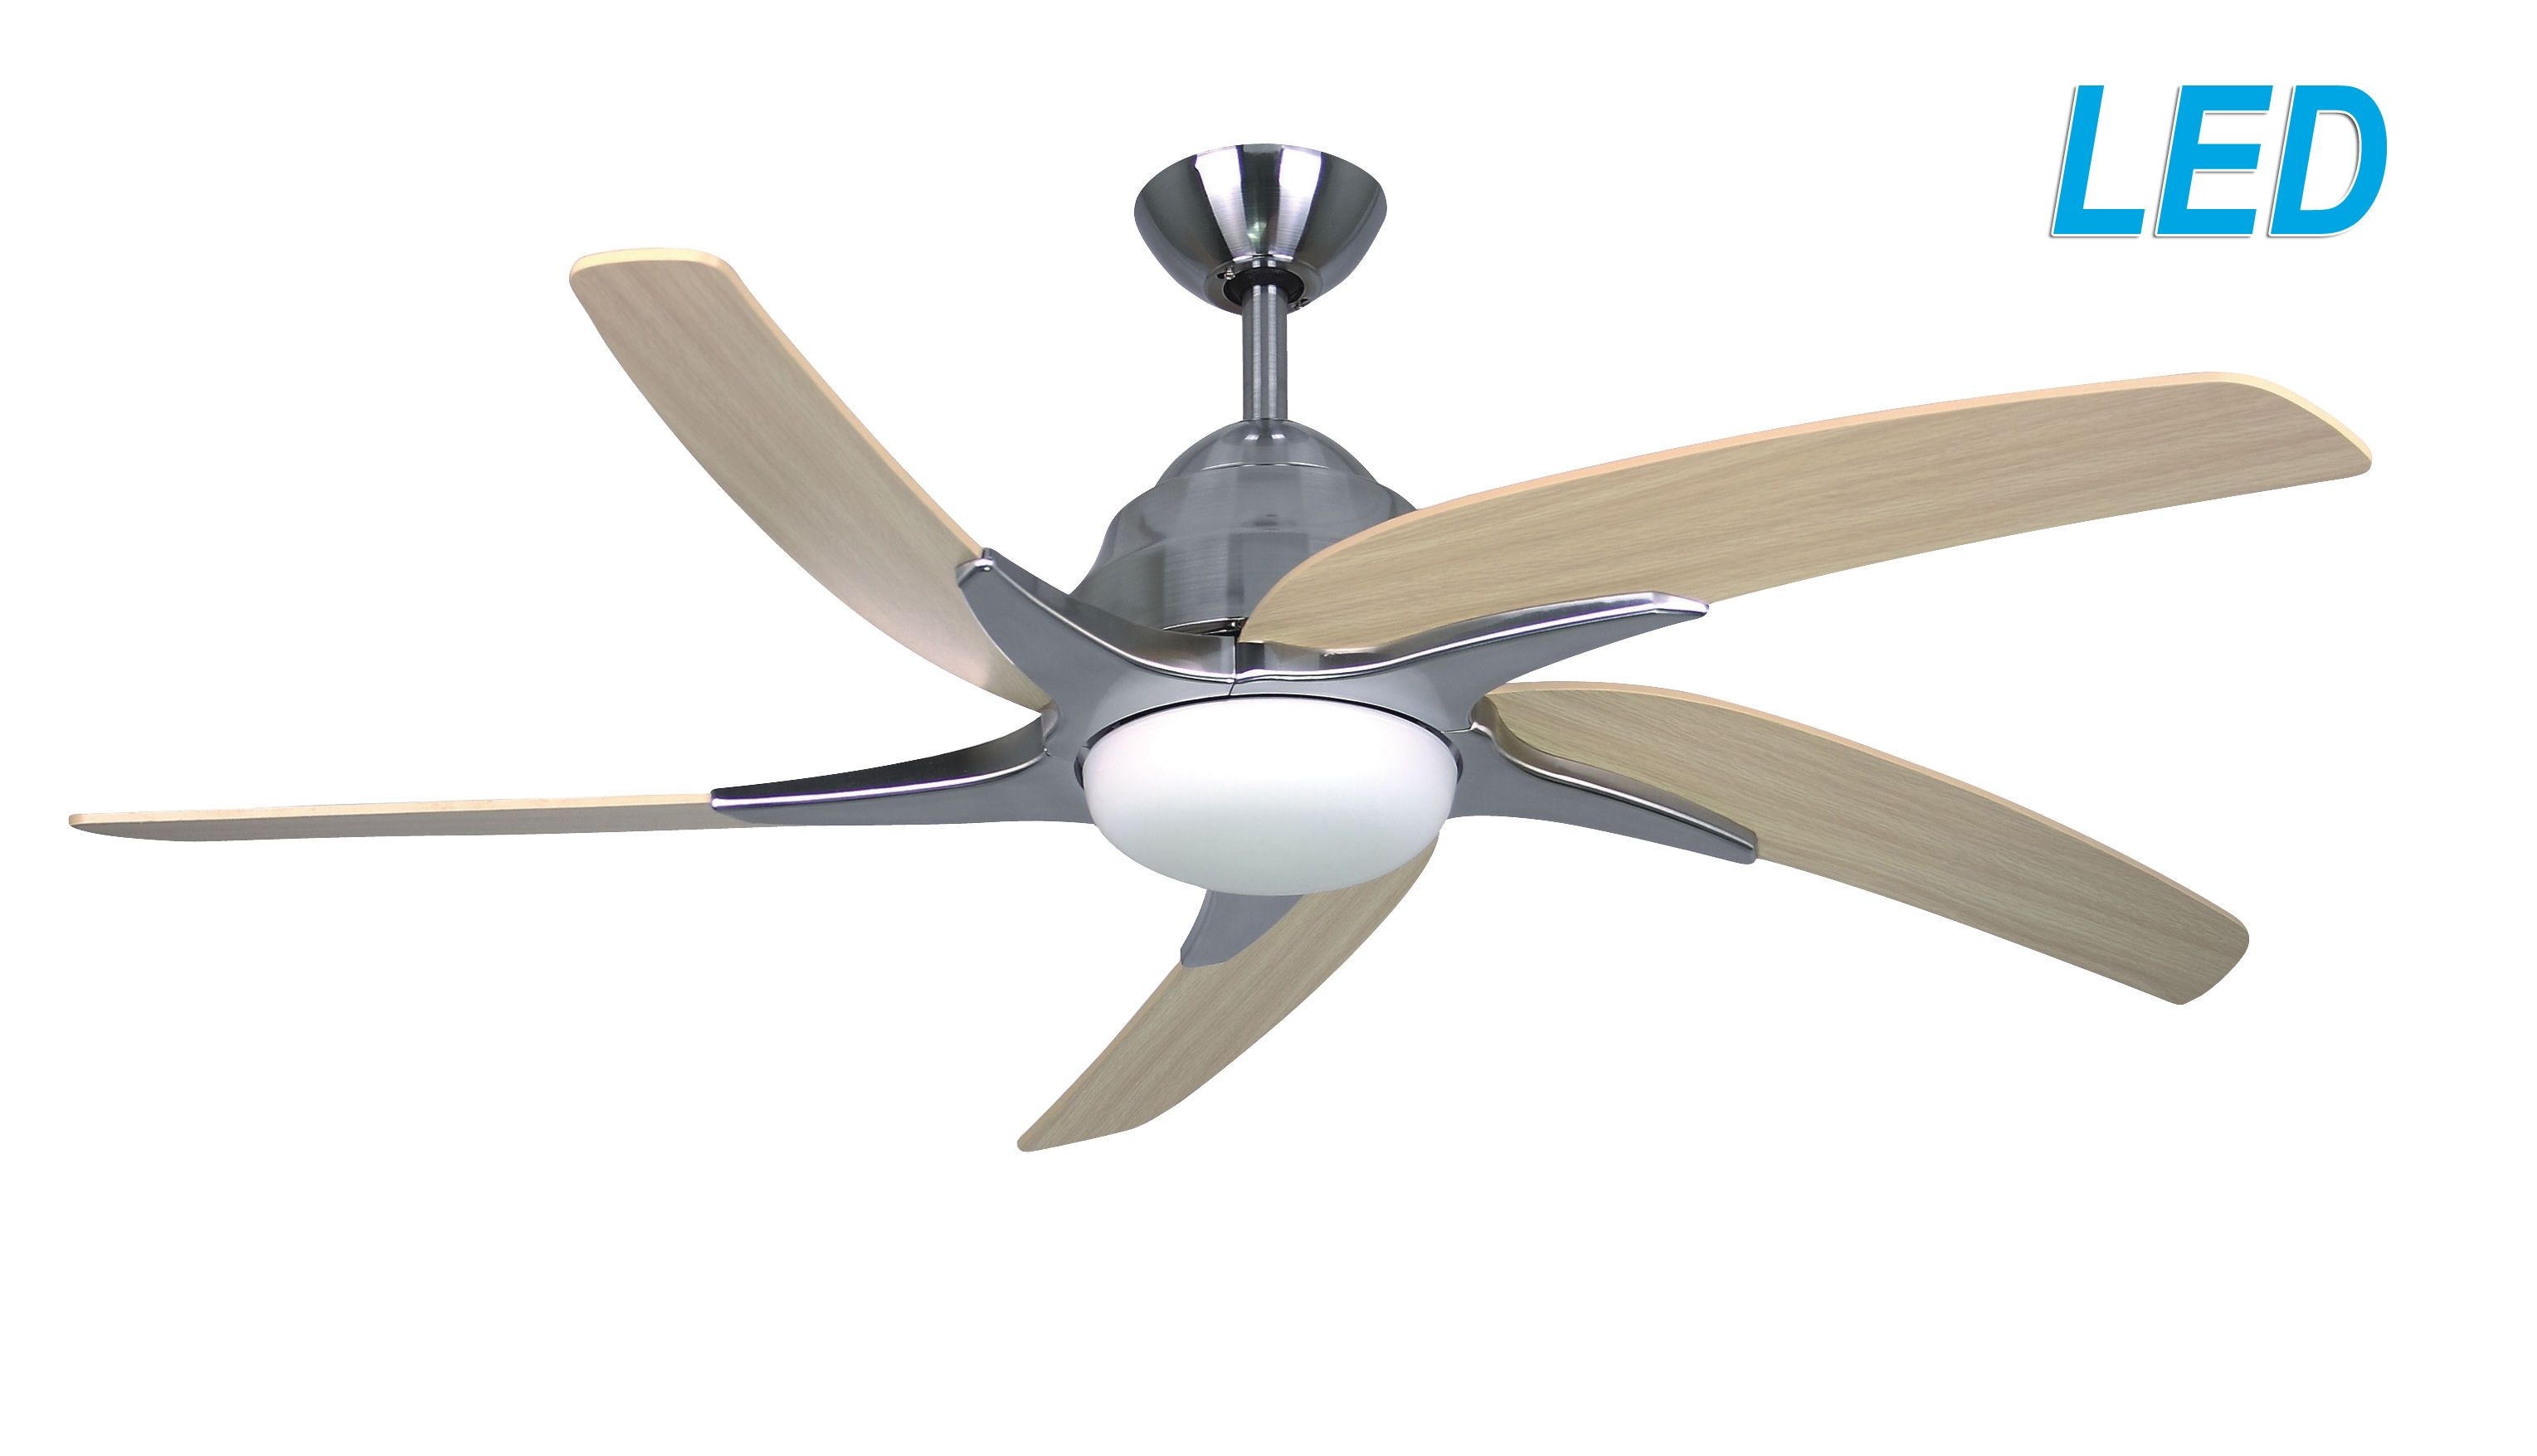 Stainless Steel Ceiling Fan With Light And Remote3058 X 1755